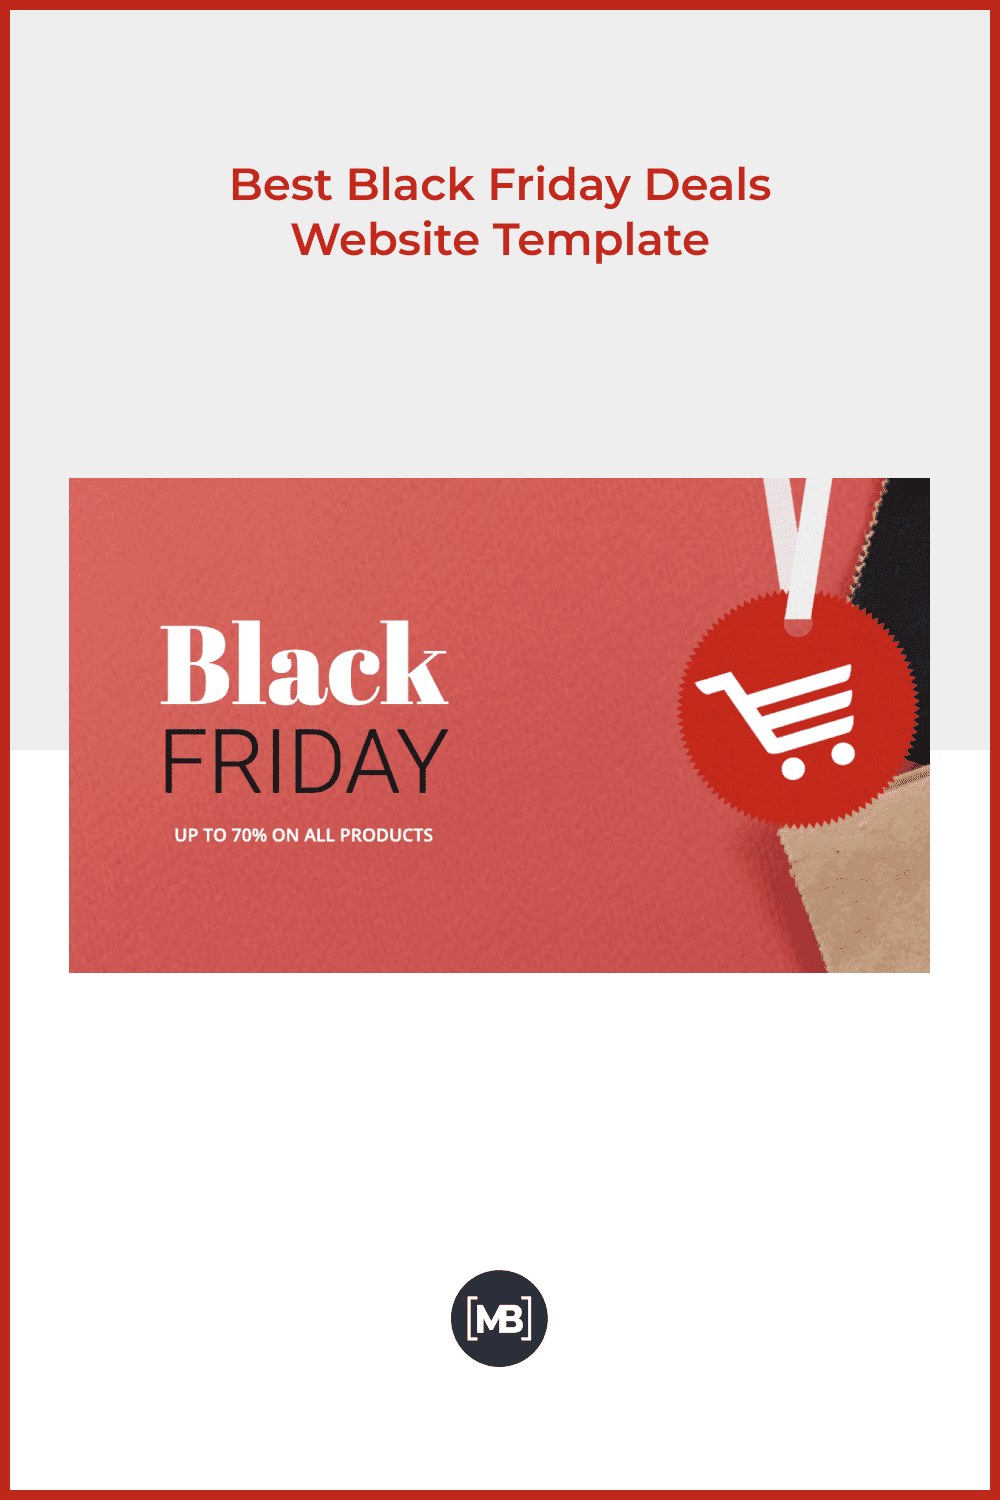 Black Friday Website Template with Pink Backgraound and Paper Bag.